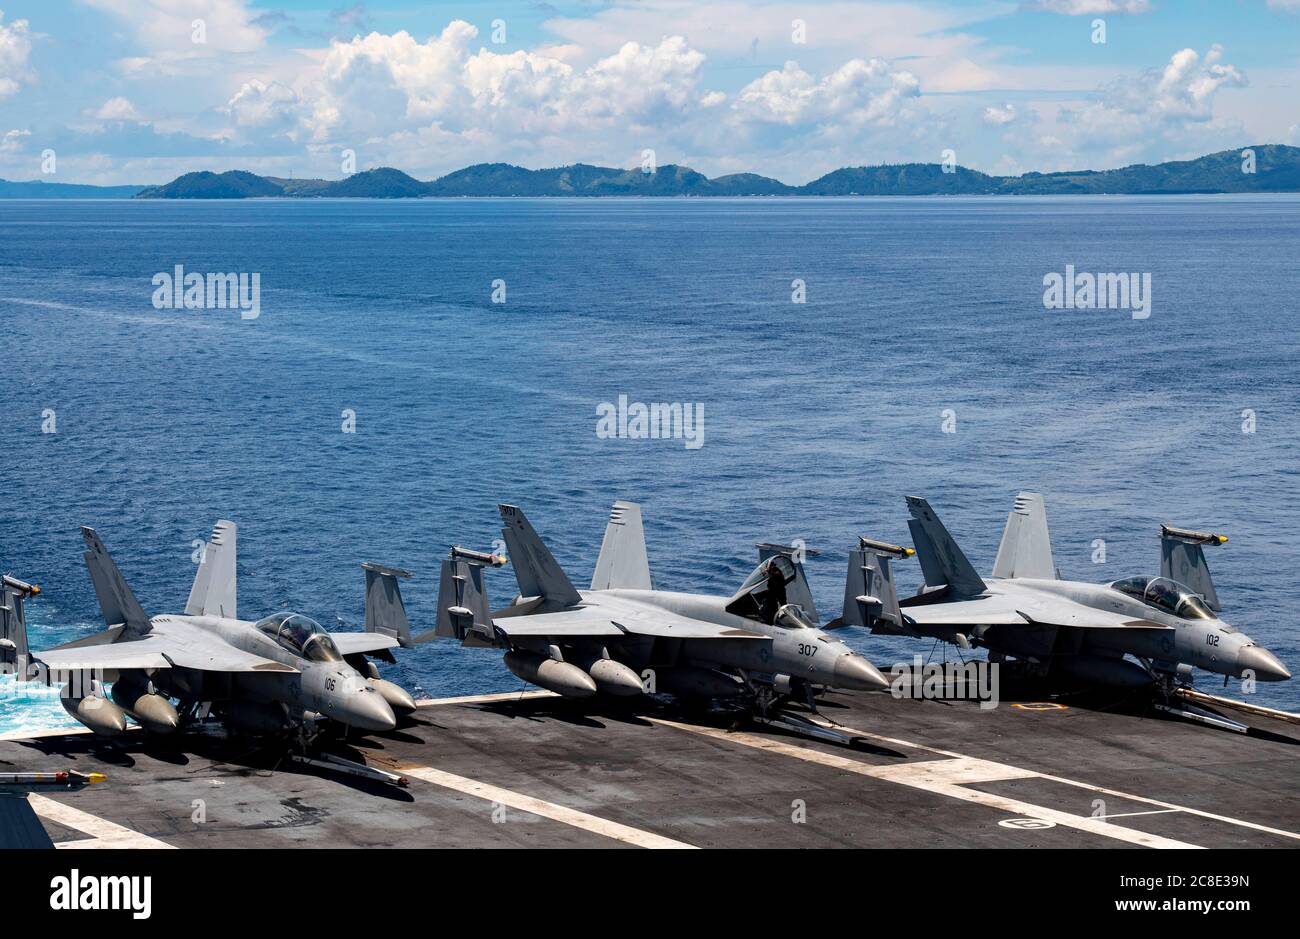 U.S. Navy F/A-18E Super Hornet fighter aircraft, lined up on the flight deck of the Nimitz-class nuclear aircraft carrier USS Nimitz underway transiting the Surigao Strait July 14, 2020 in the Philippine Sea. Stock Photo